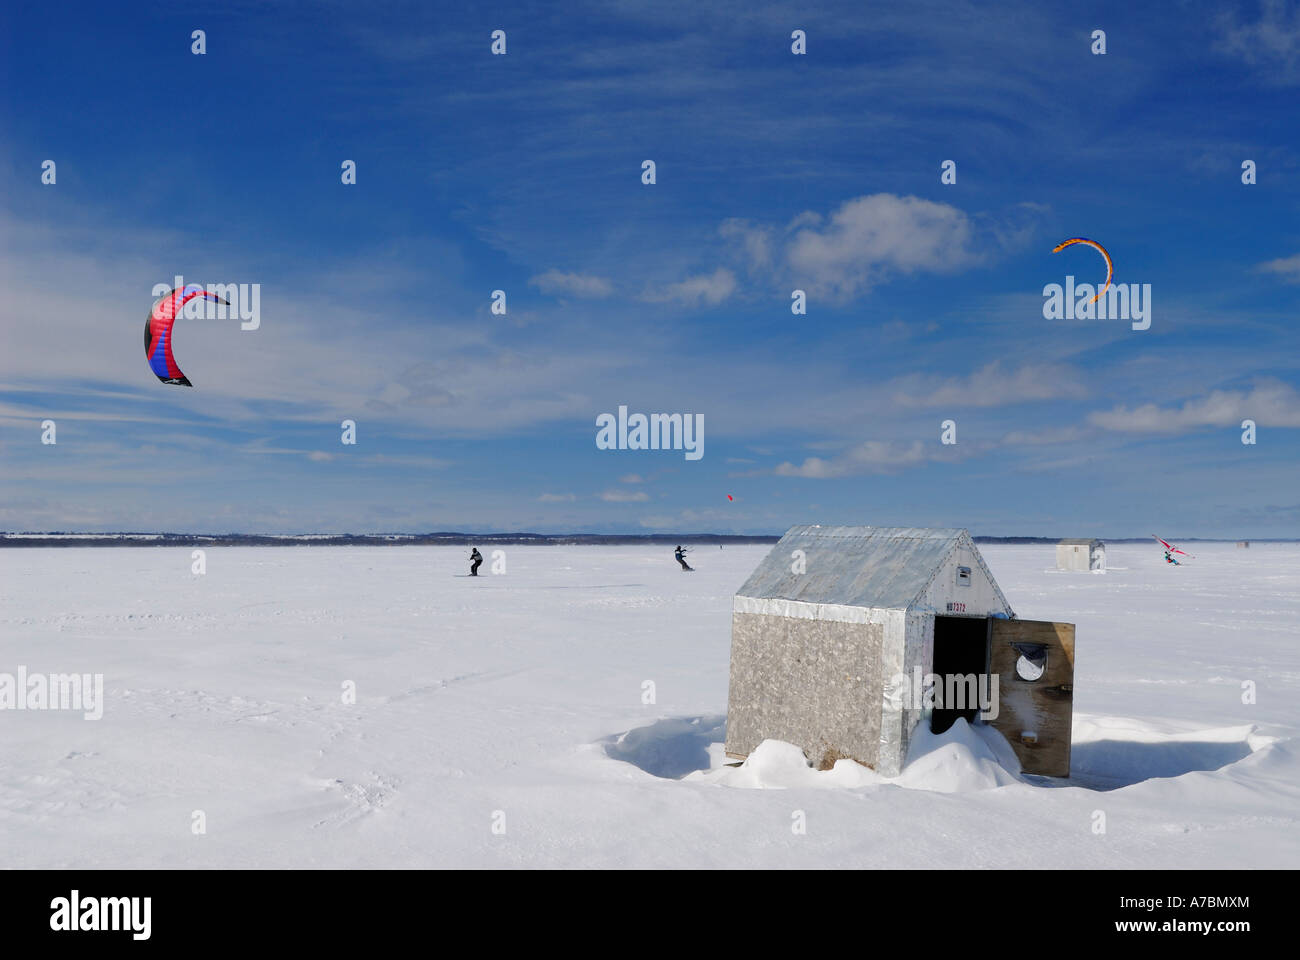 Snowfer and snowkiters with icefishing huts on frozen Lake Simcoe Ontario Canada Stock Photo